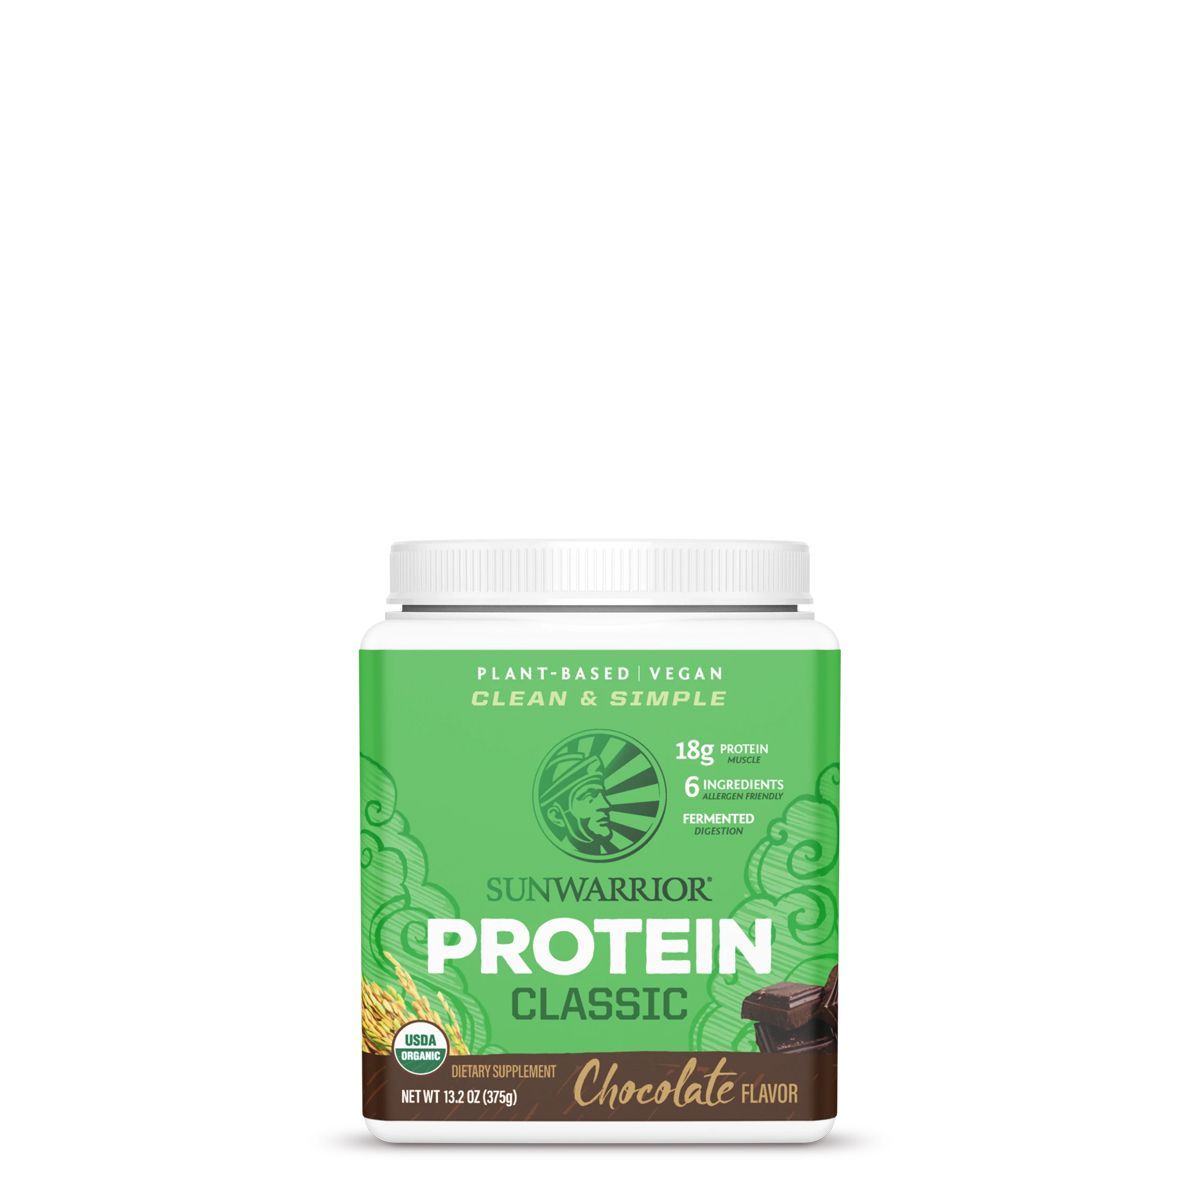 SUNWARRIOR - PLANT BASED CLEAN & SIMPLE PROTEIN - CLASSIC - 375 G